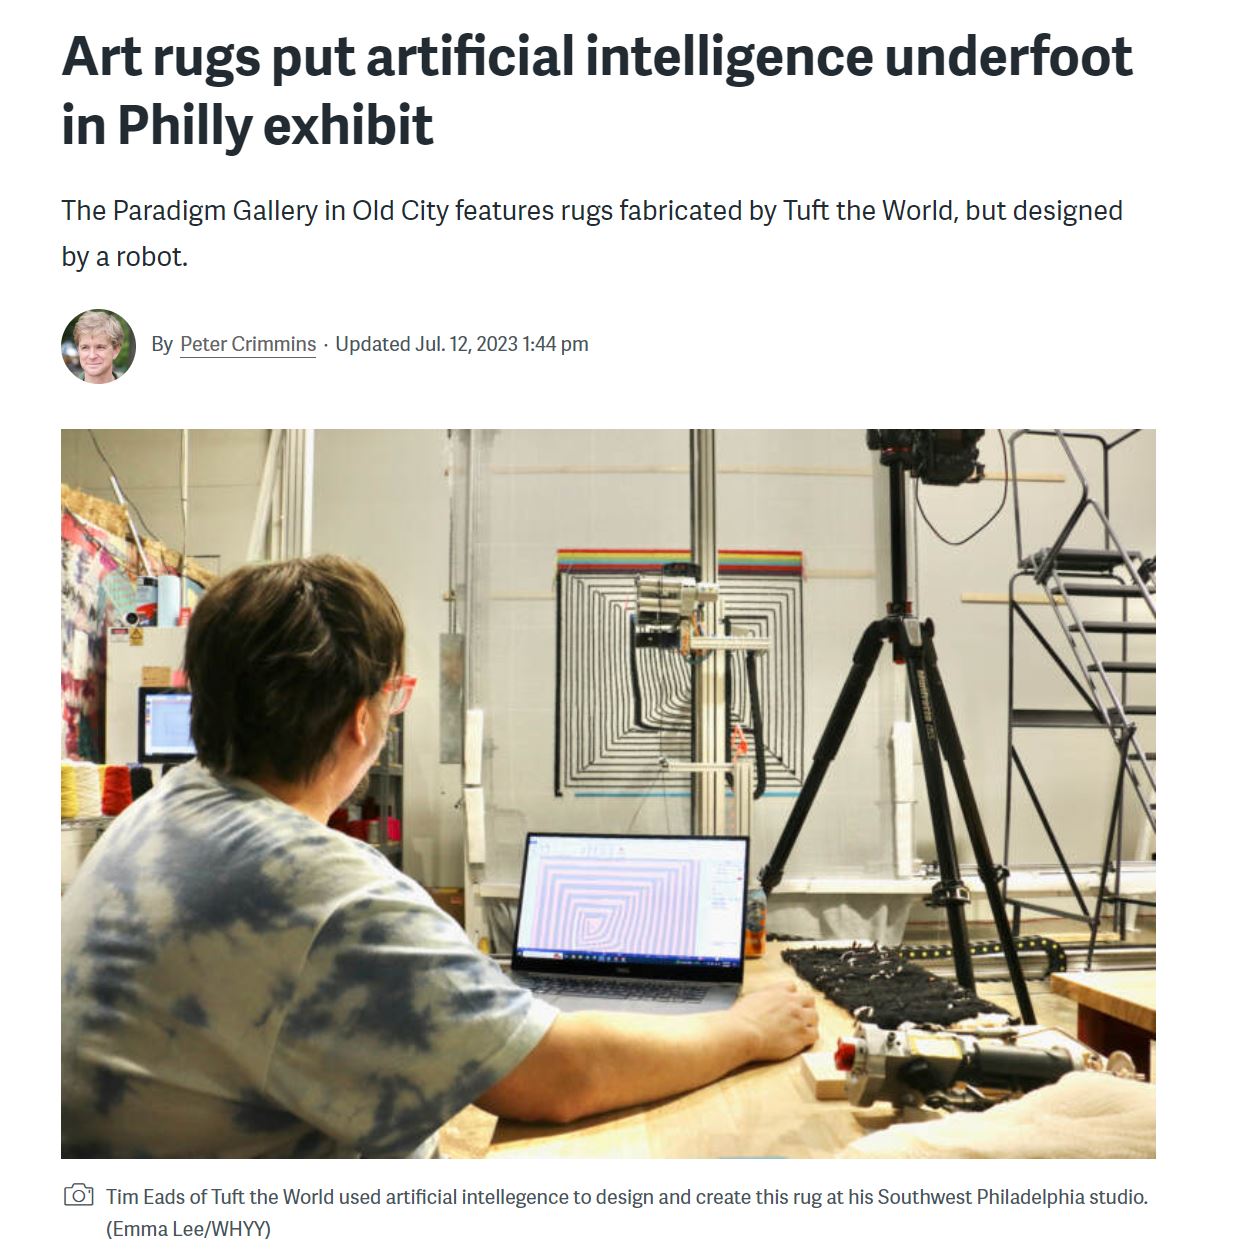 WHYY - Art rugs put artificial intelligence underfoot in Philly exhibit